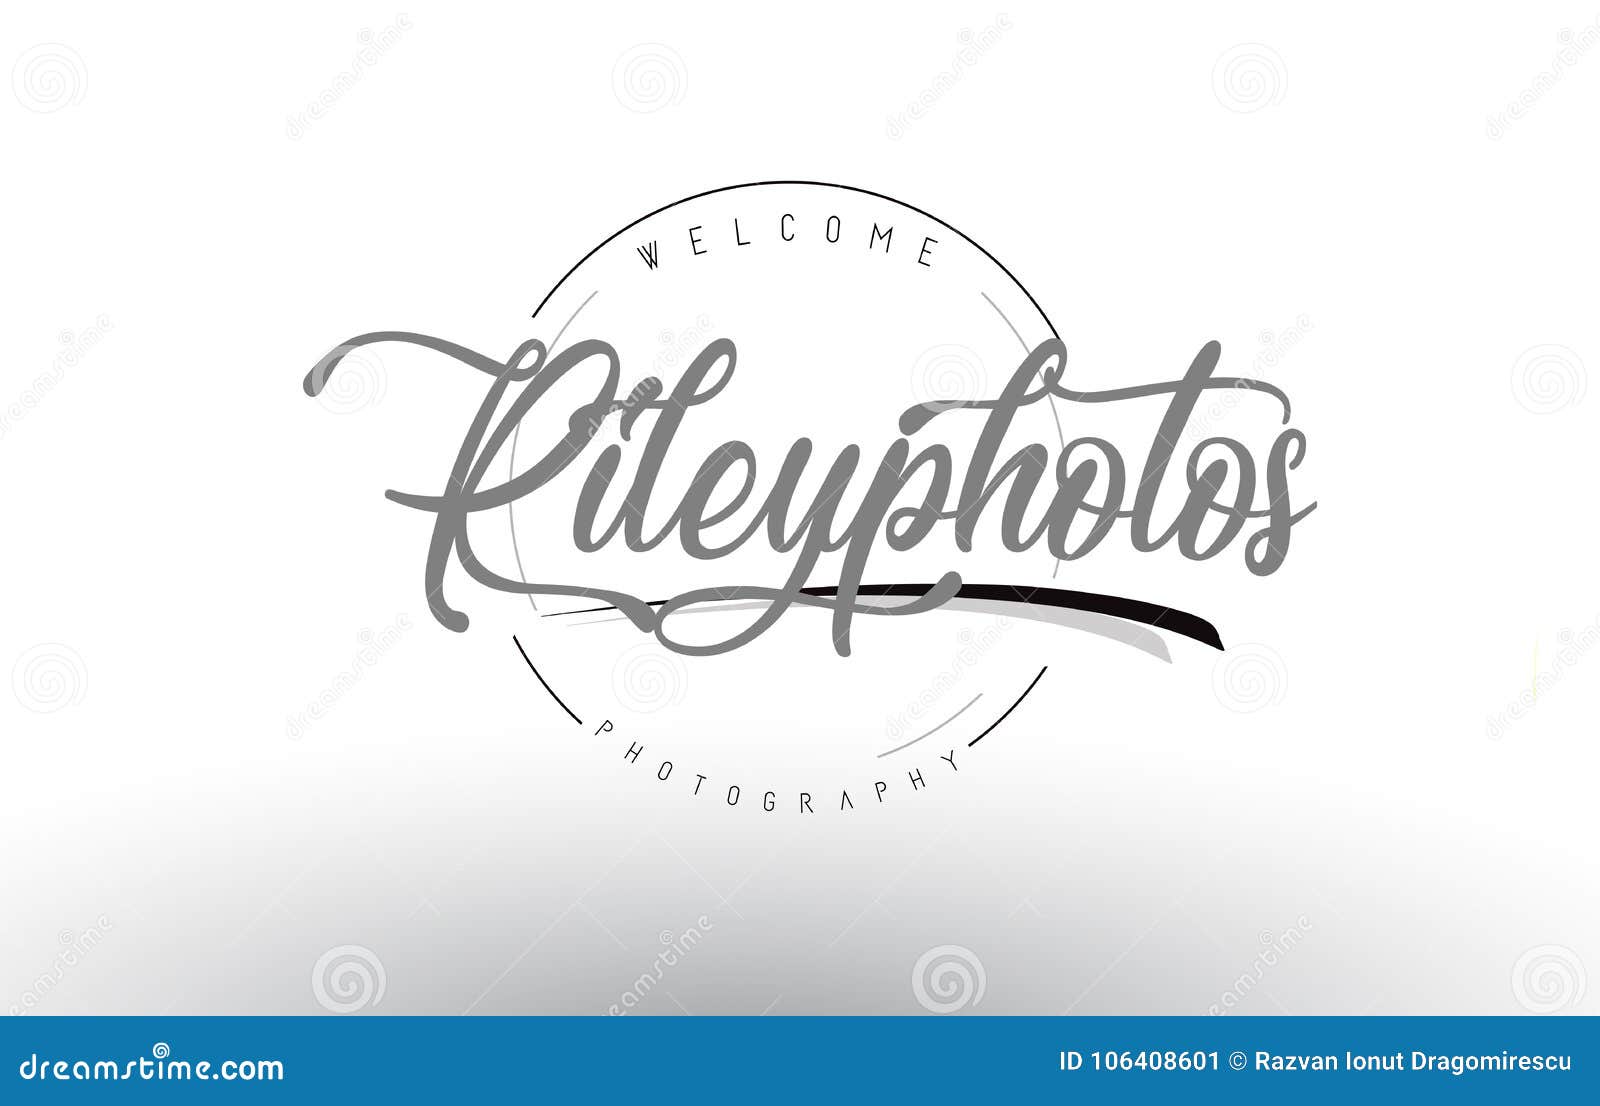 Name riley in various retro graphic design Vector Image